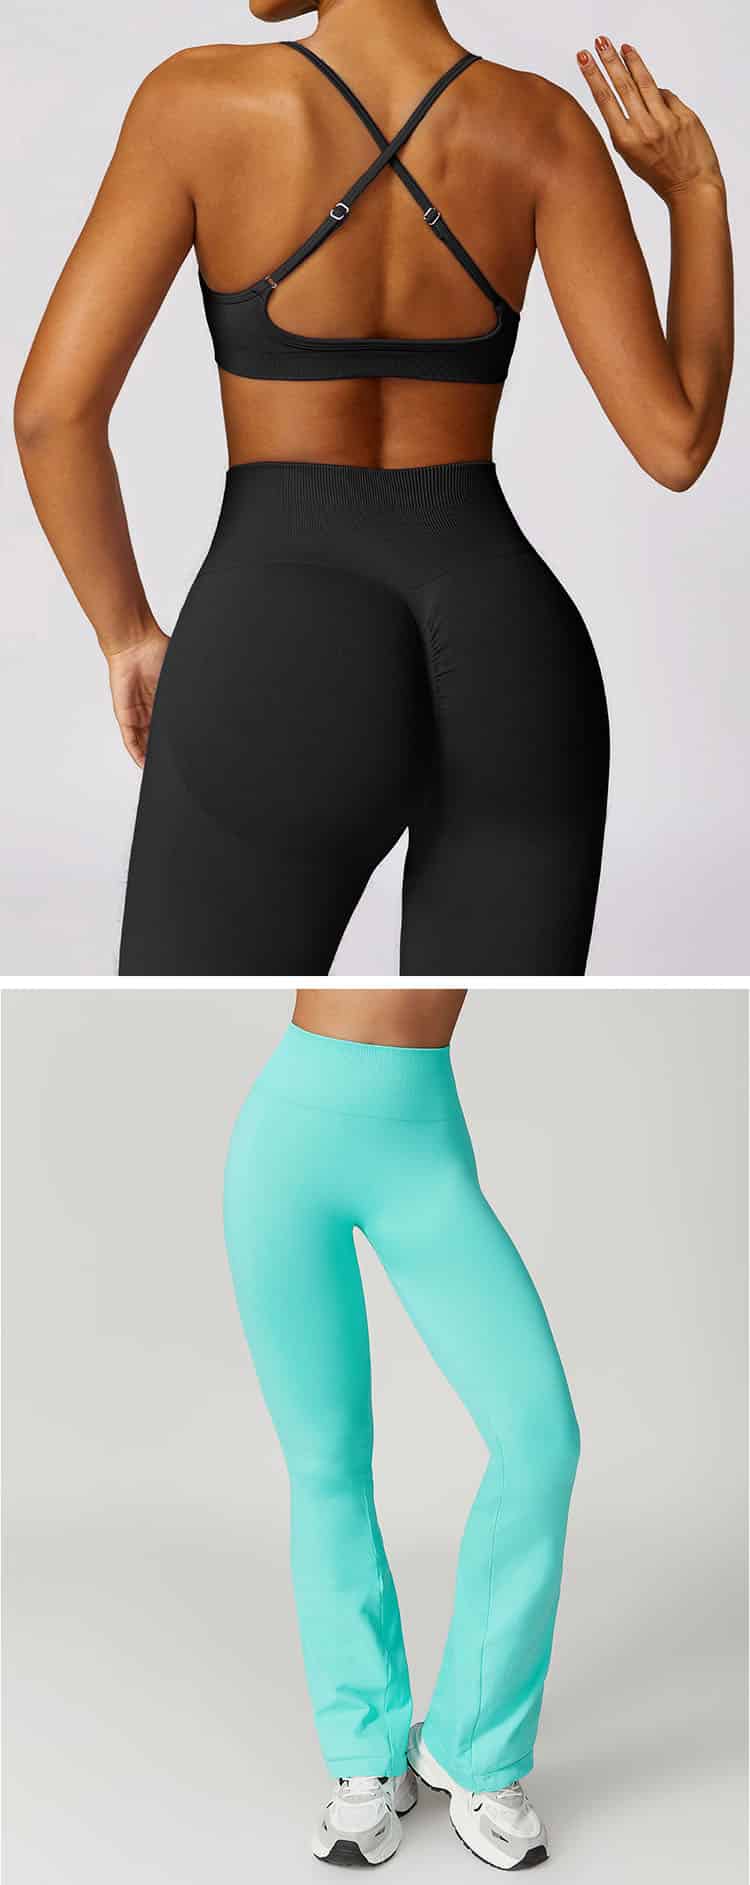 In conclusion, our tangerine workout pants offer both style and comfort